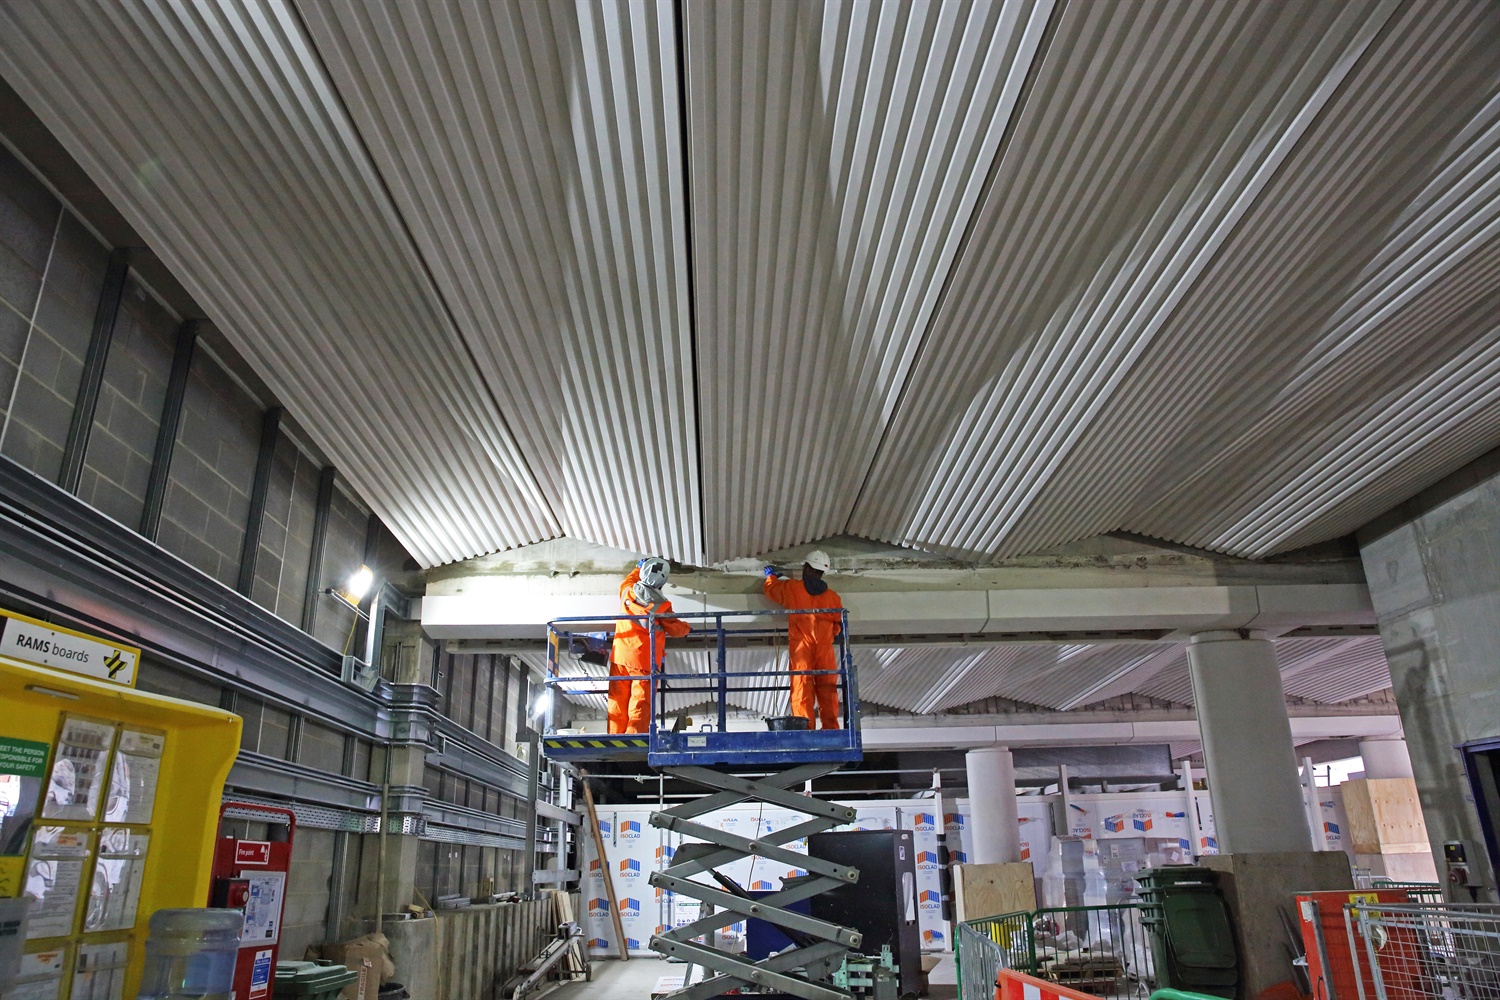 Crossrail unveils striking ceiling images at Farringdon and Liverpool Street stations